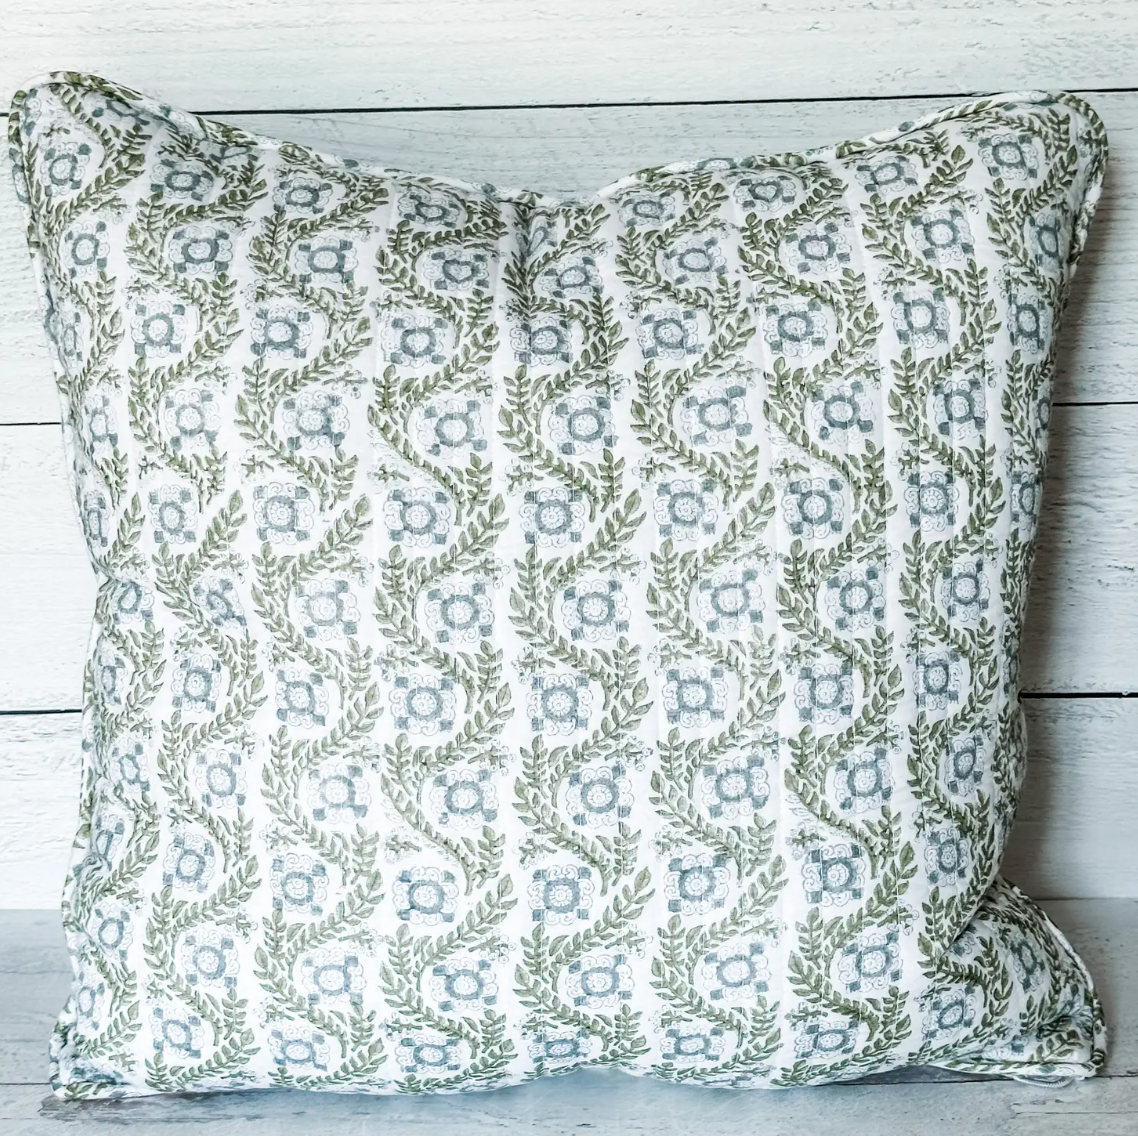 Villa Vaux Grand in Gray and Green Quilted Pillow